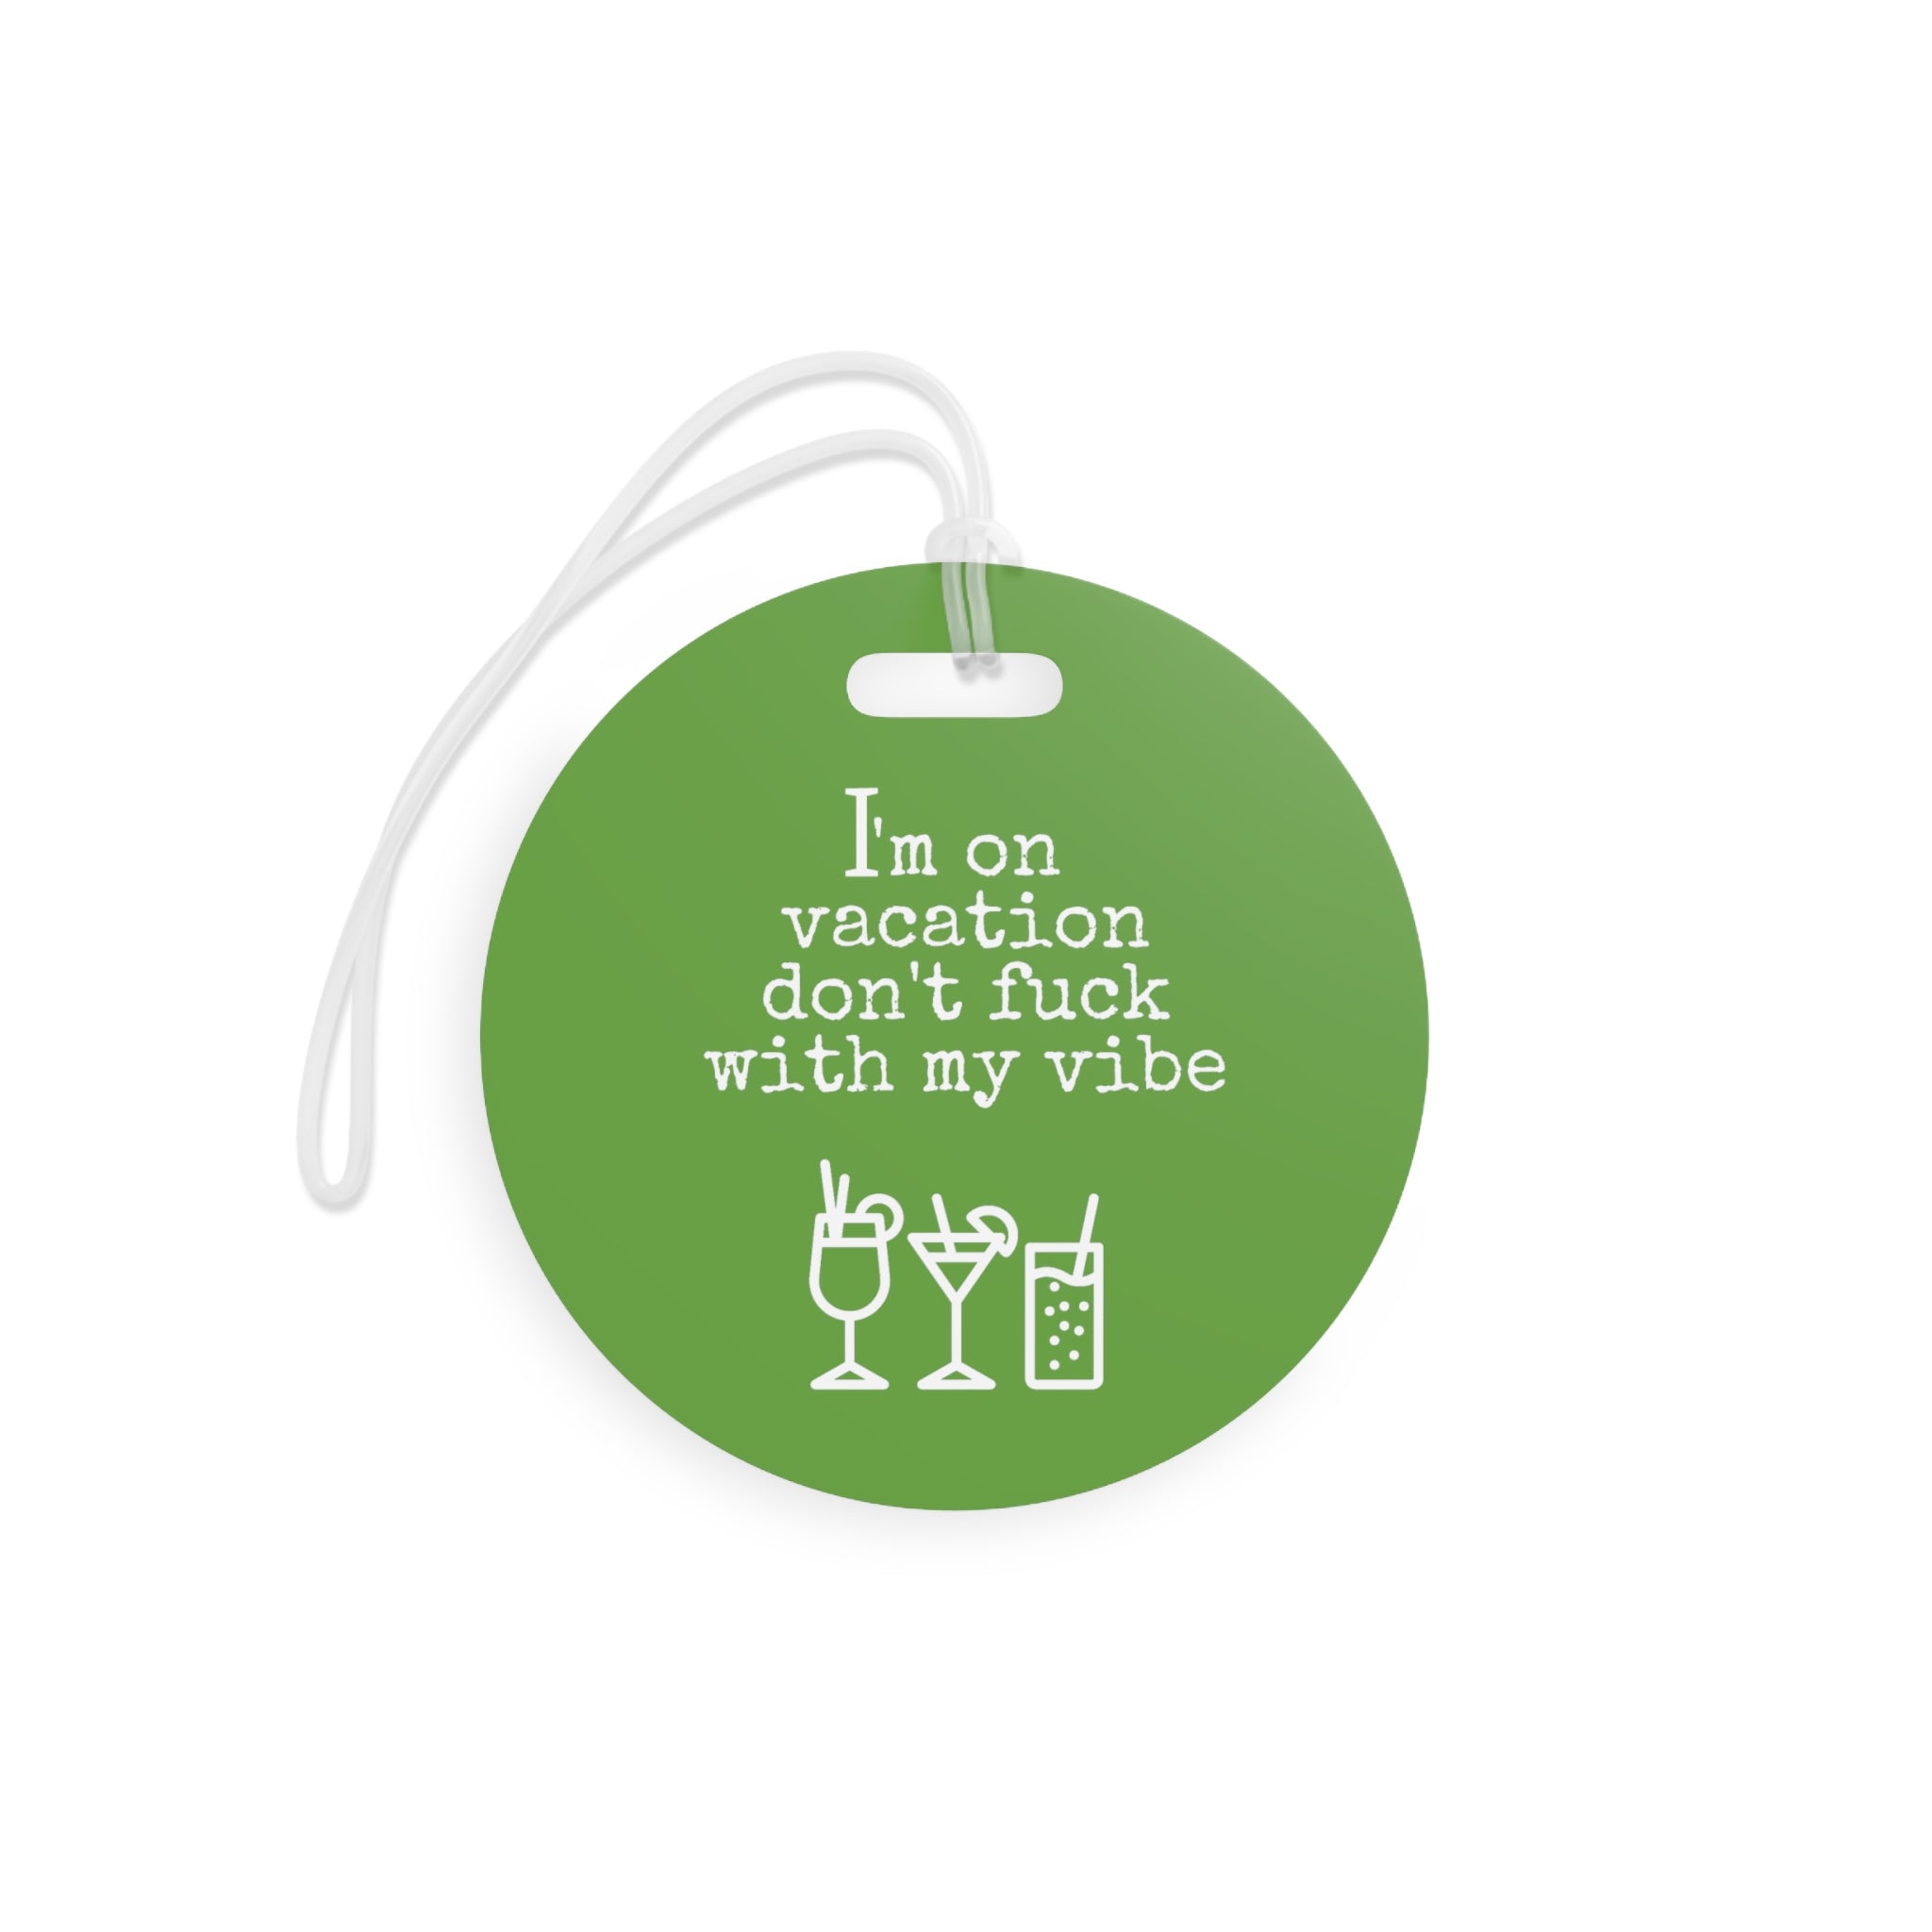  I'm On Vacation - Don't Fuck With My Vibe (Apple Green) Luggage Tag, Funny Luggage Tag, Funny Travel Lover Gift, Gift For Her Luggage TagRoundOnesize